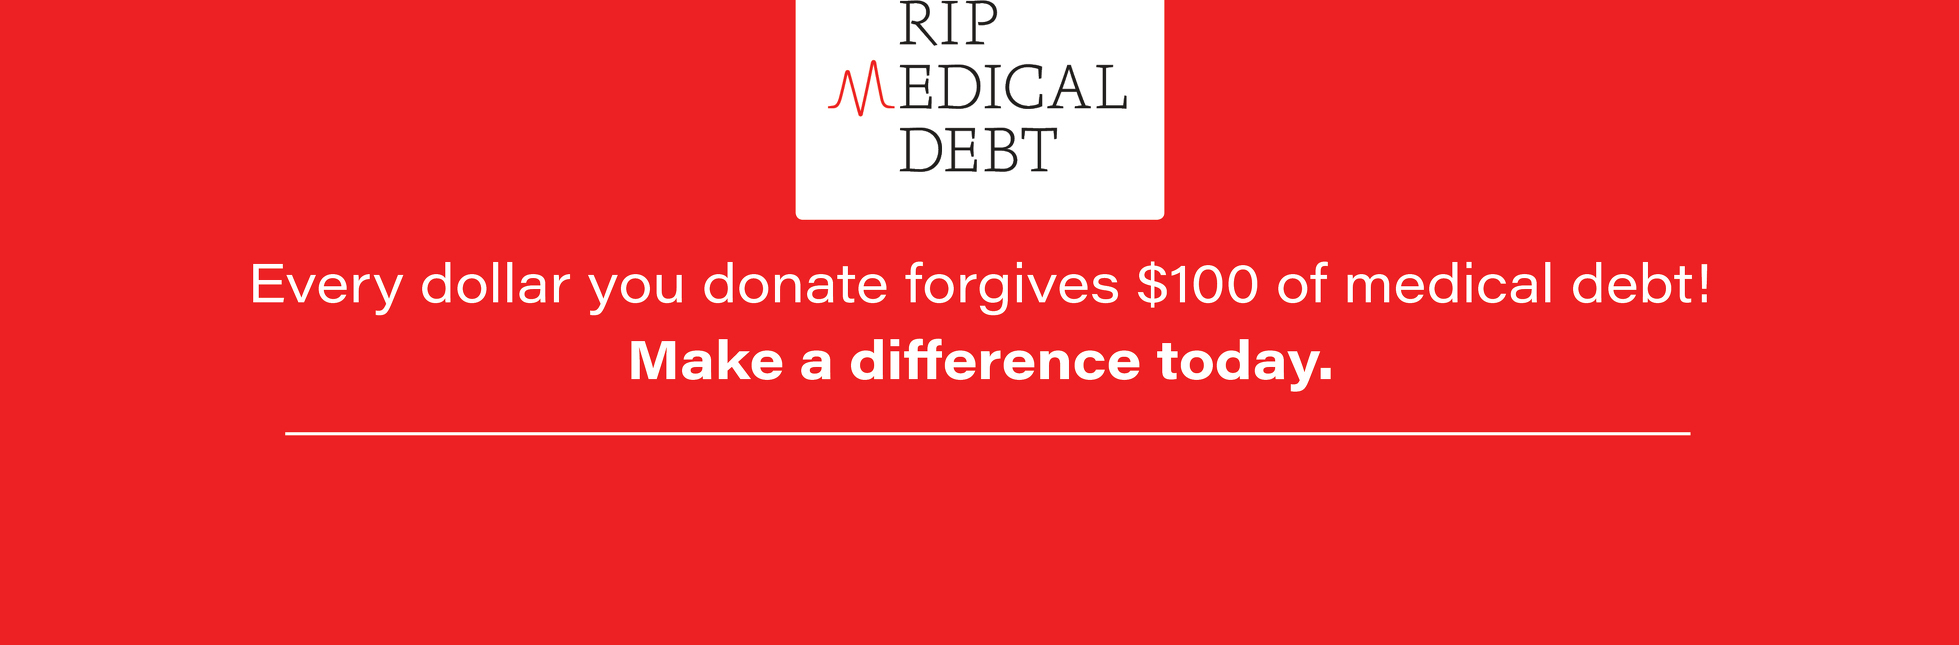 Holy Innocents' Episcopal Church's Medical Debt Relief Campaign